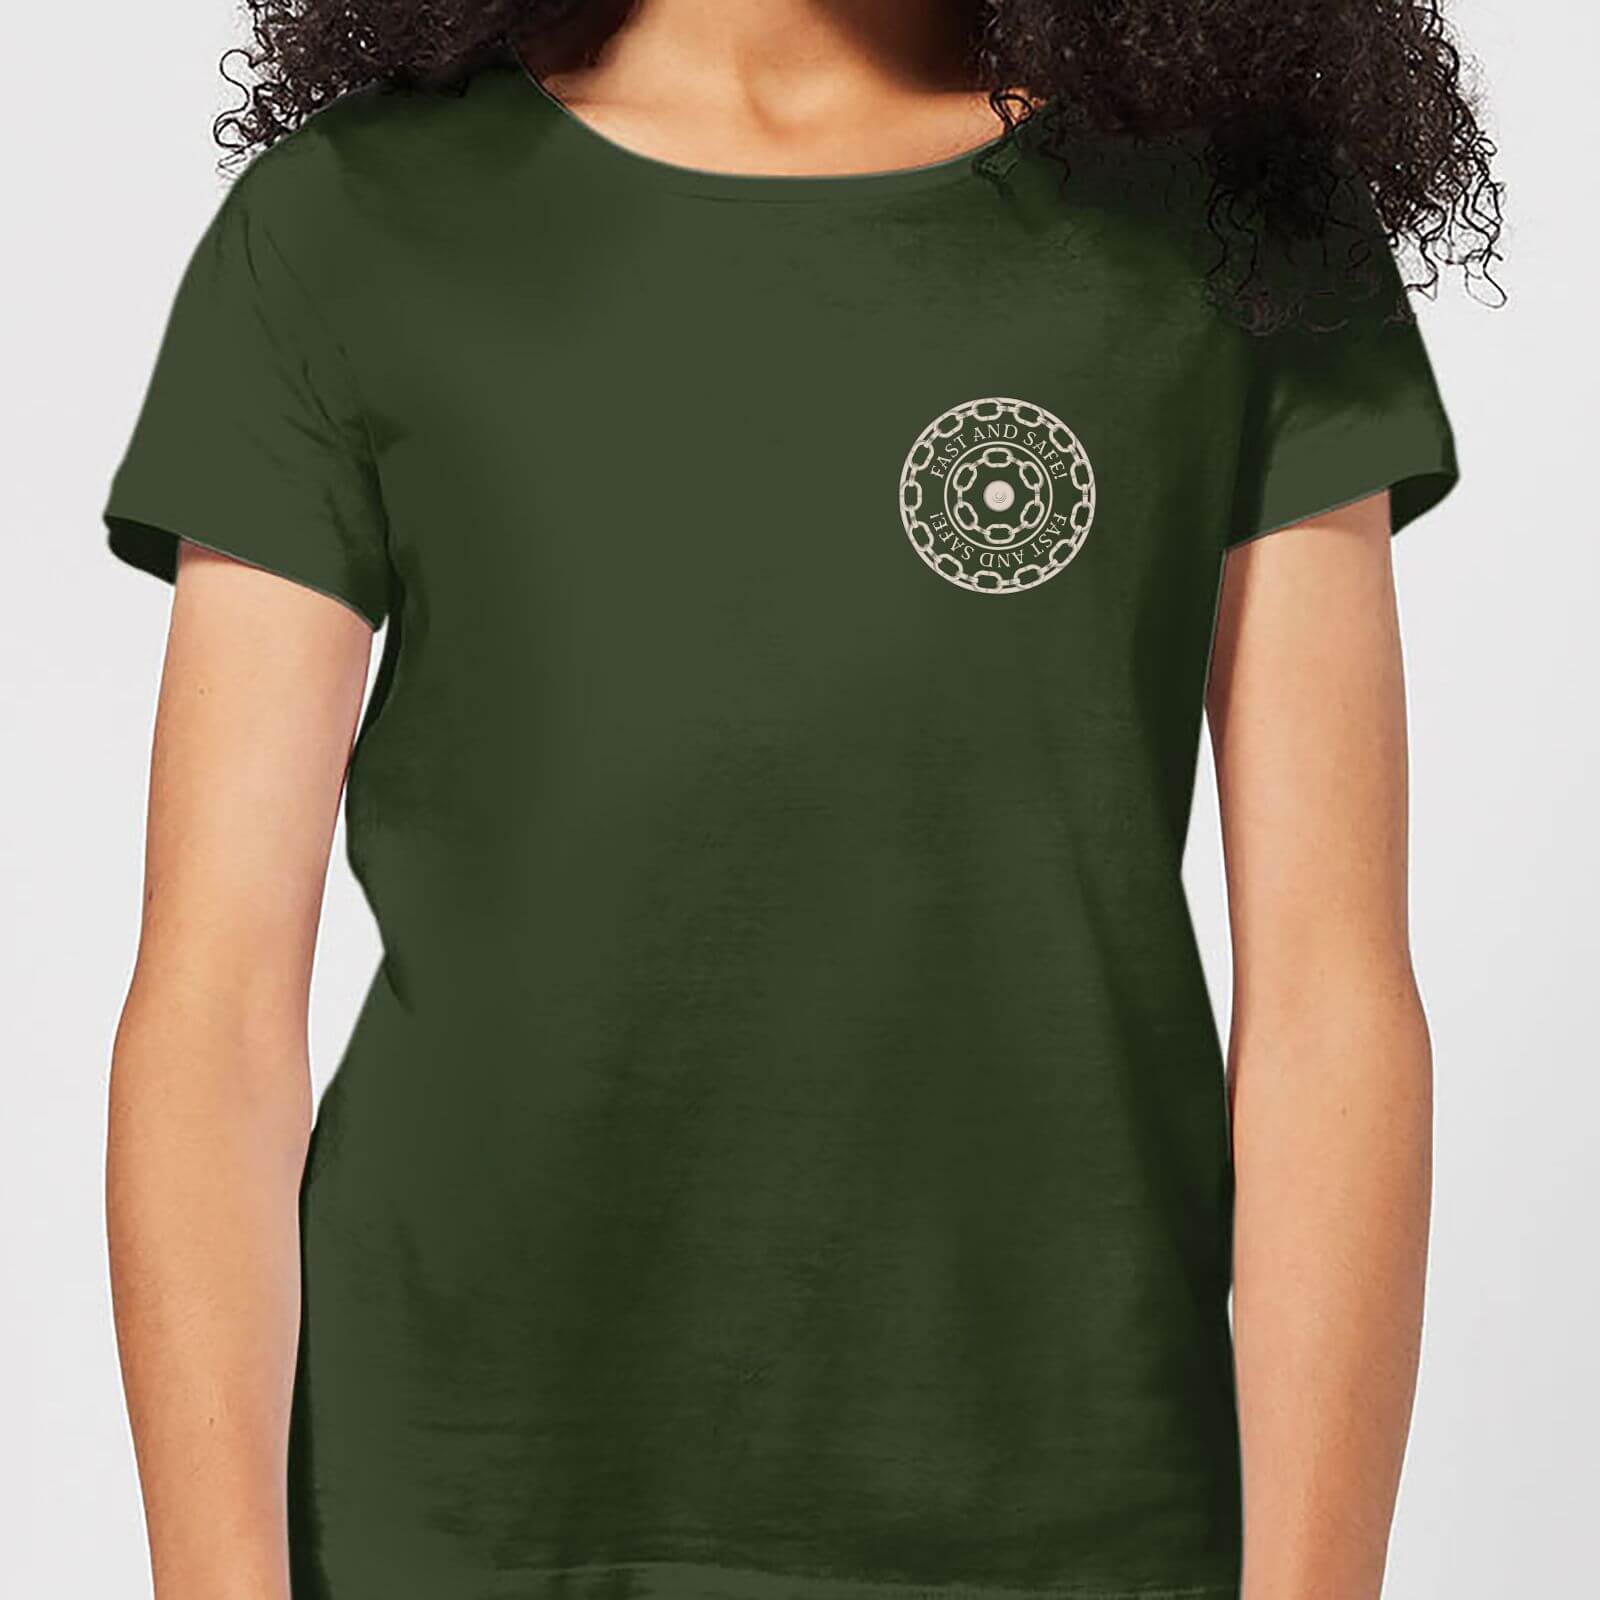 Crystal Maze Fast And Safe Pocket Women's T-Shirt - Forest Green - S - Forest Green